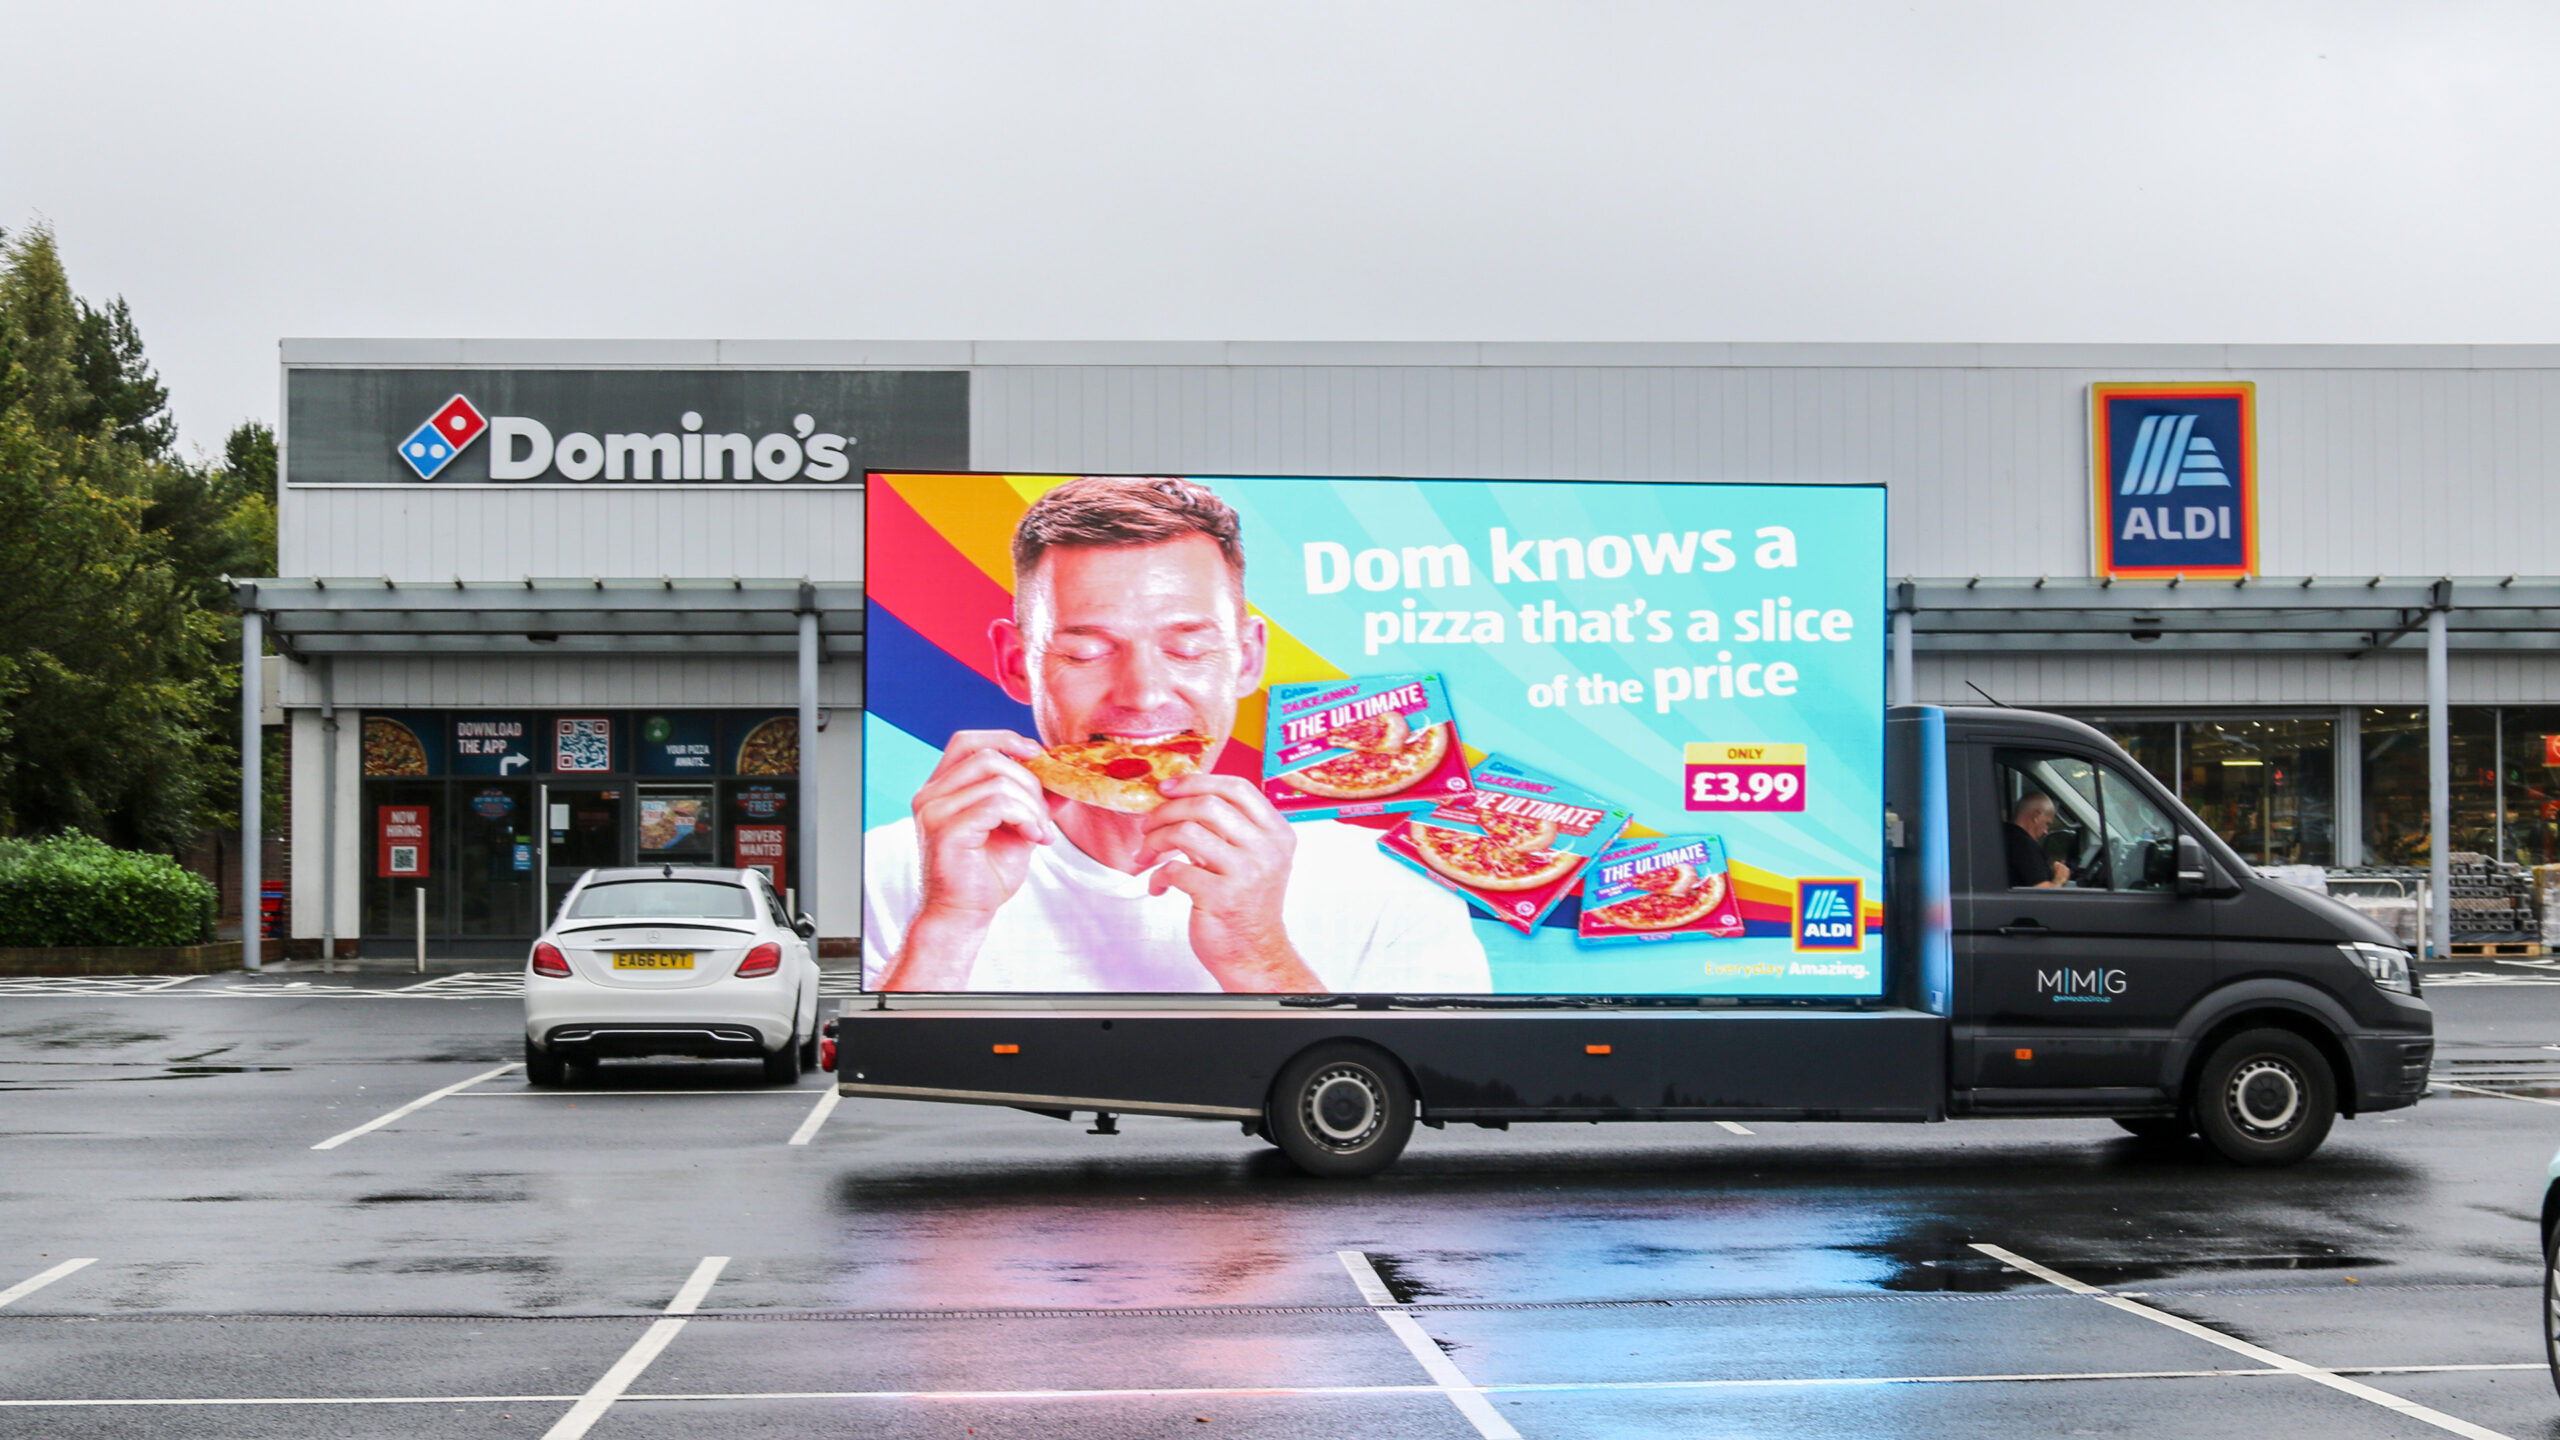 Digivan outside Dominos and Aldi with contextual creative